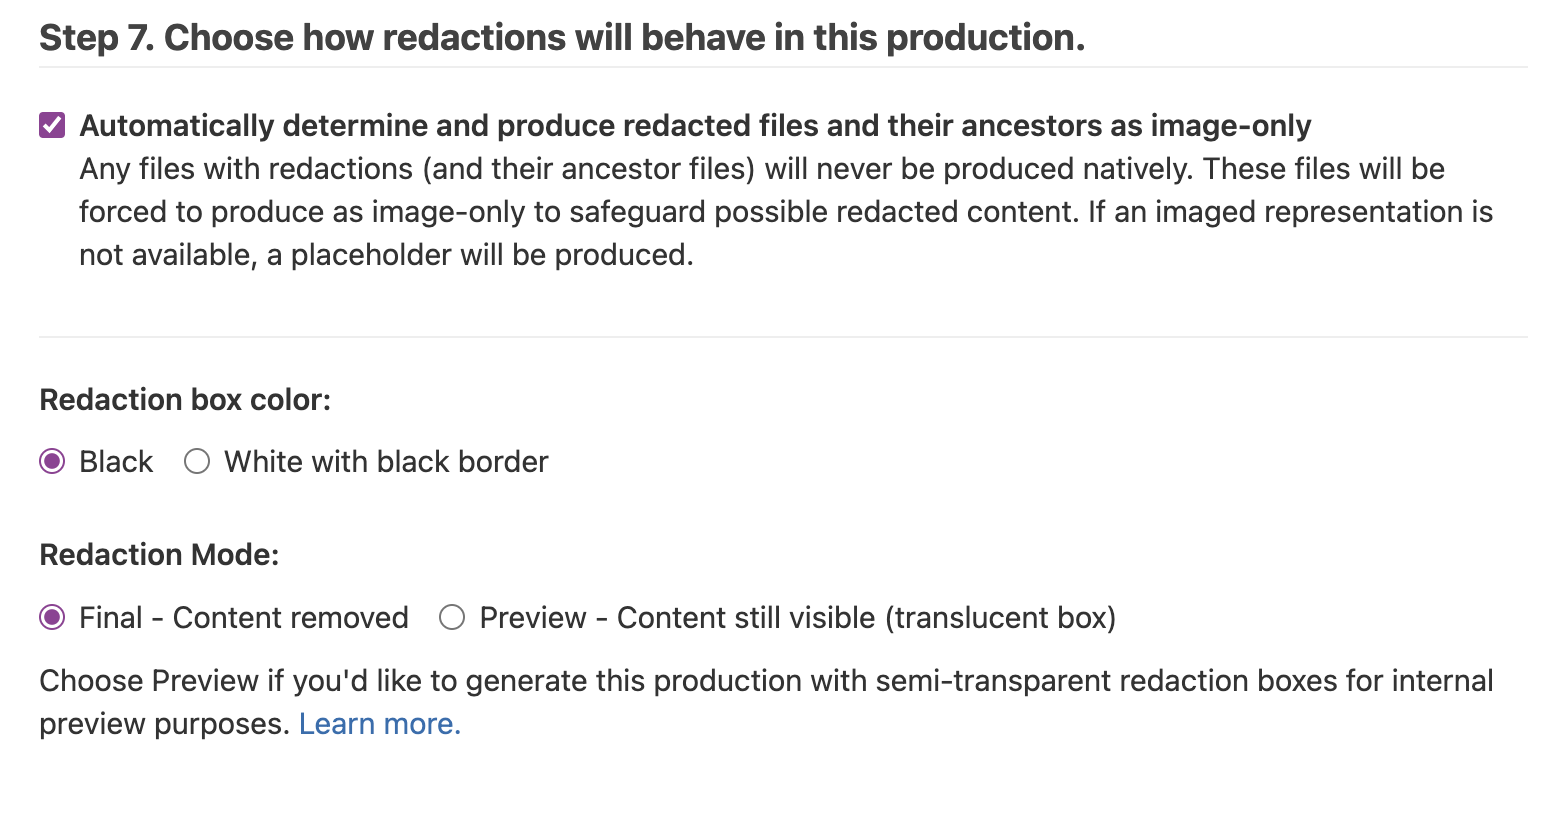 Choose how redactions will behave in this production.